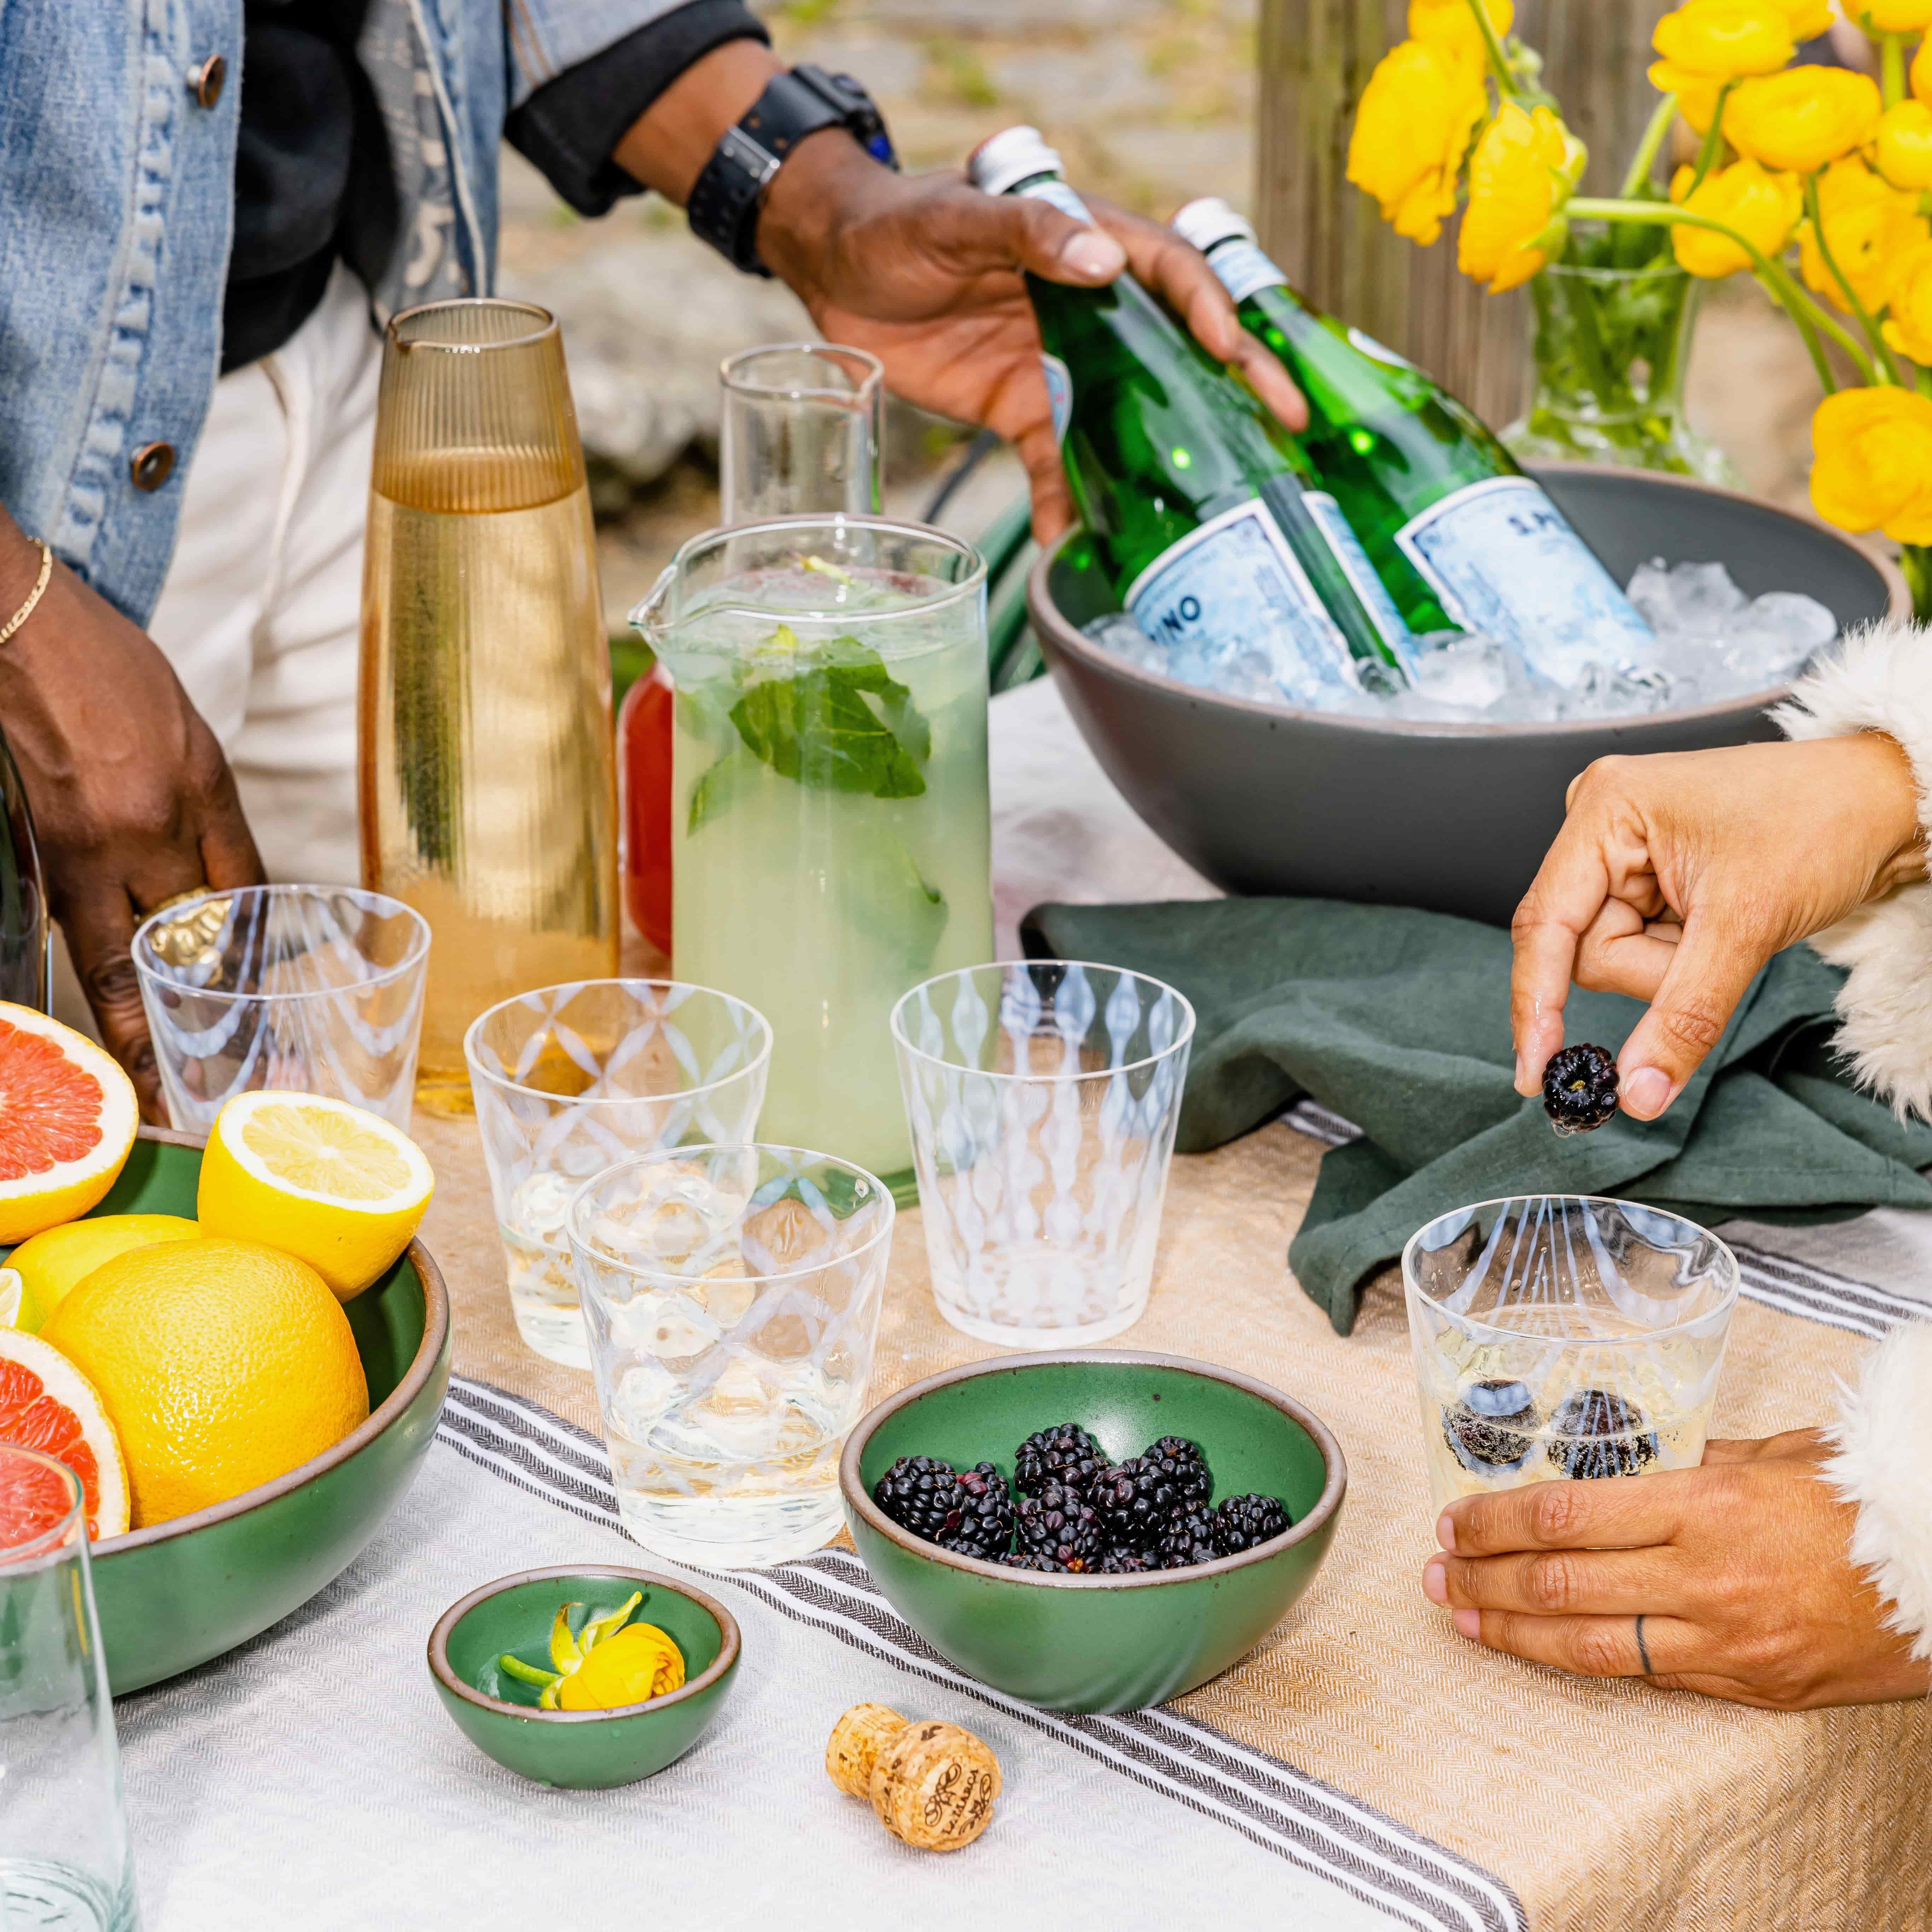 On a table outdoors is a little bar setup filled with various lowball glass tumblers, several glass pitchers, and fruits. A hand is dropping a blueberry in a drink and another hand is reaching for bottled seltzer.